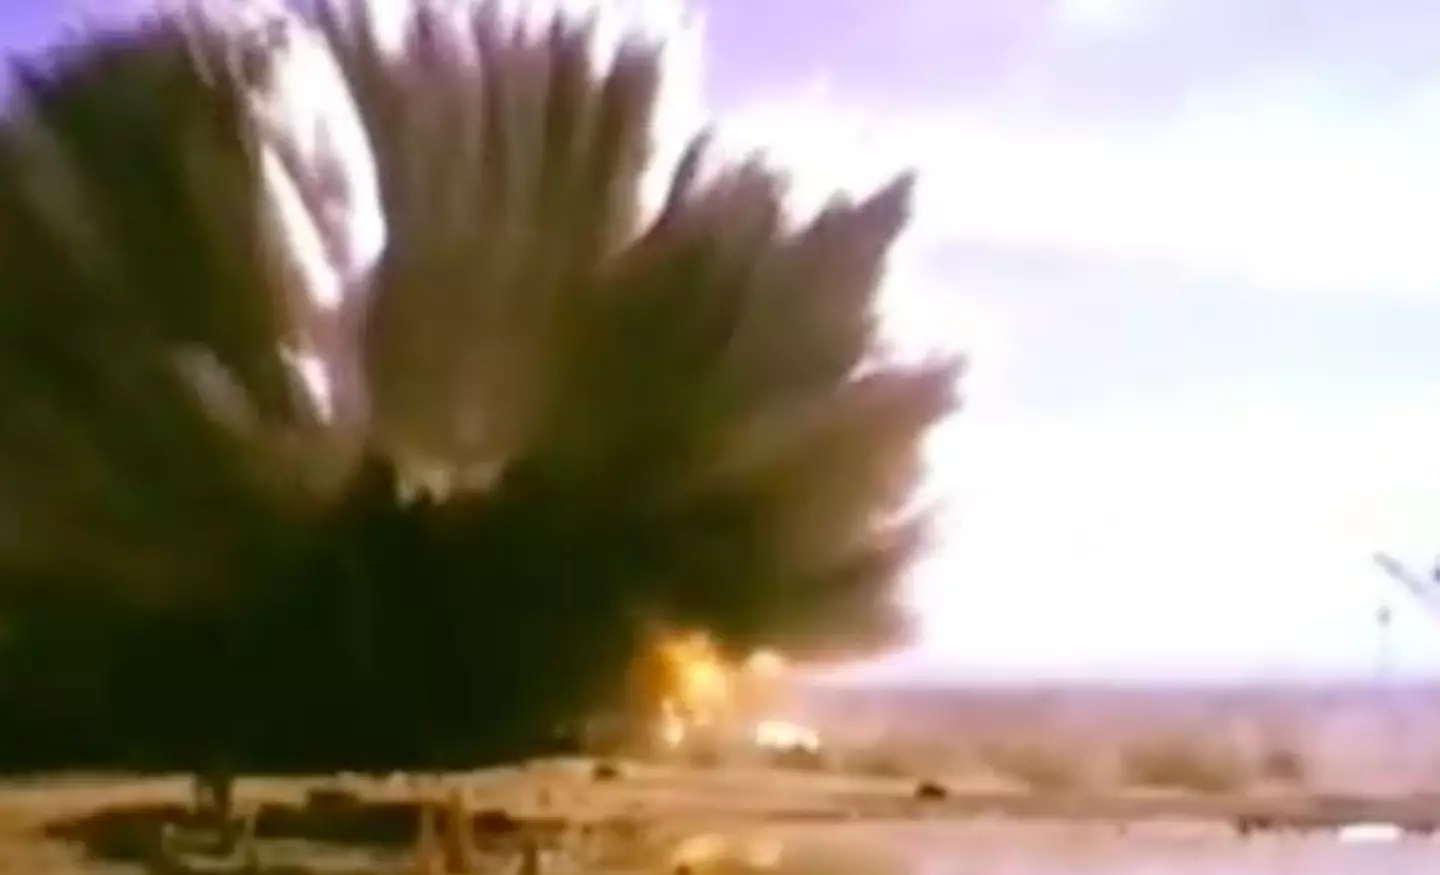 The explosion that results from the collision is huge.